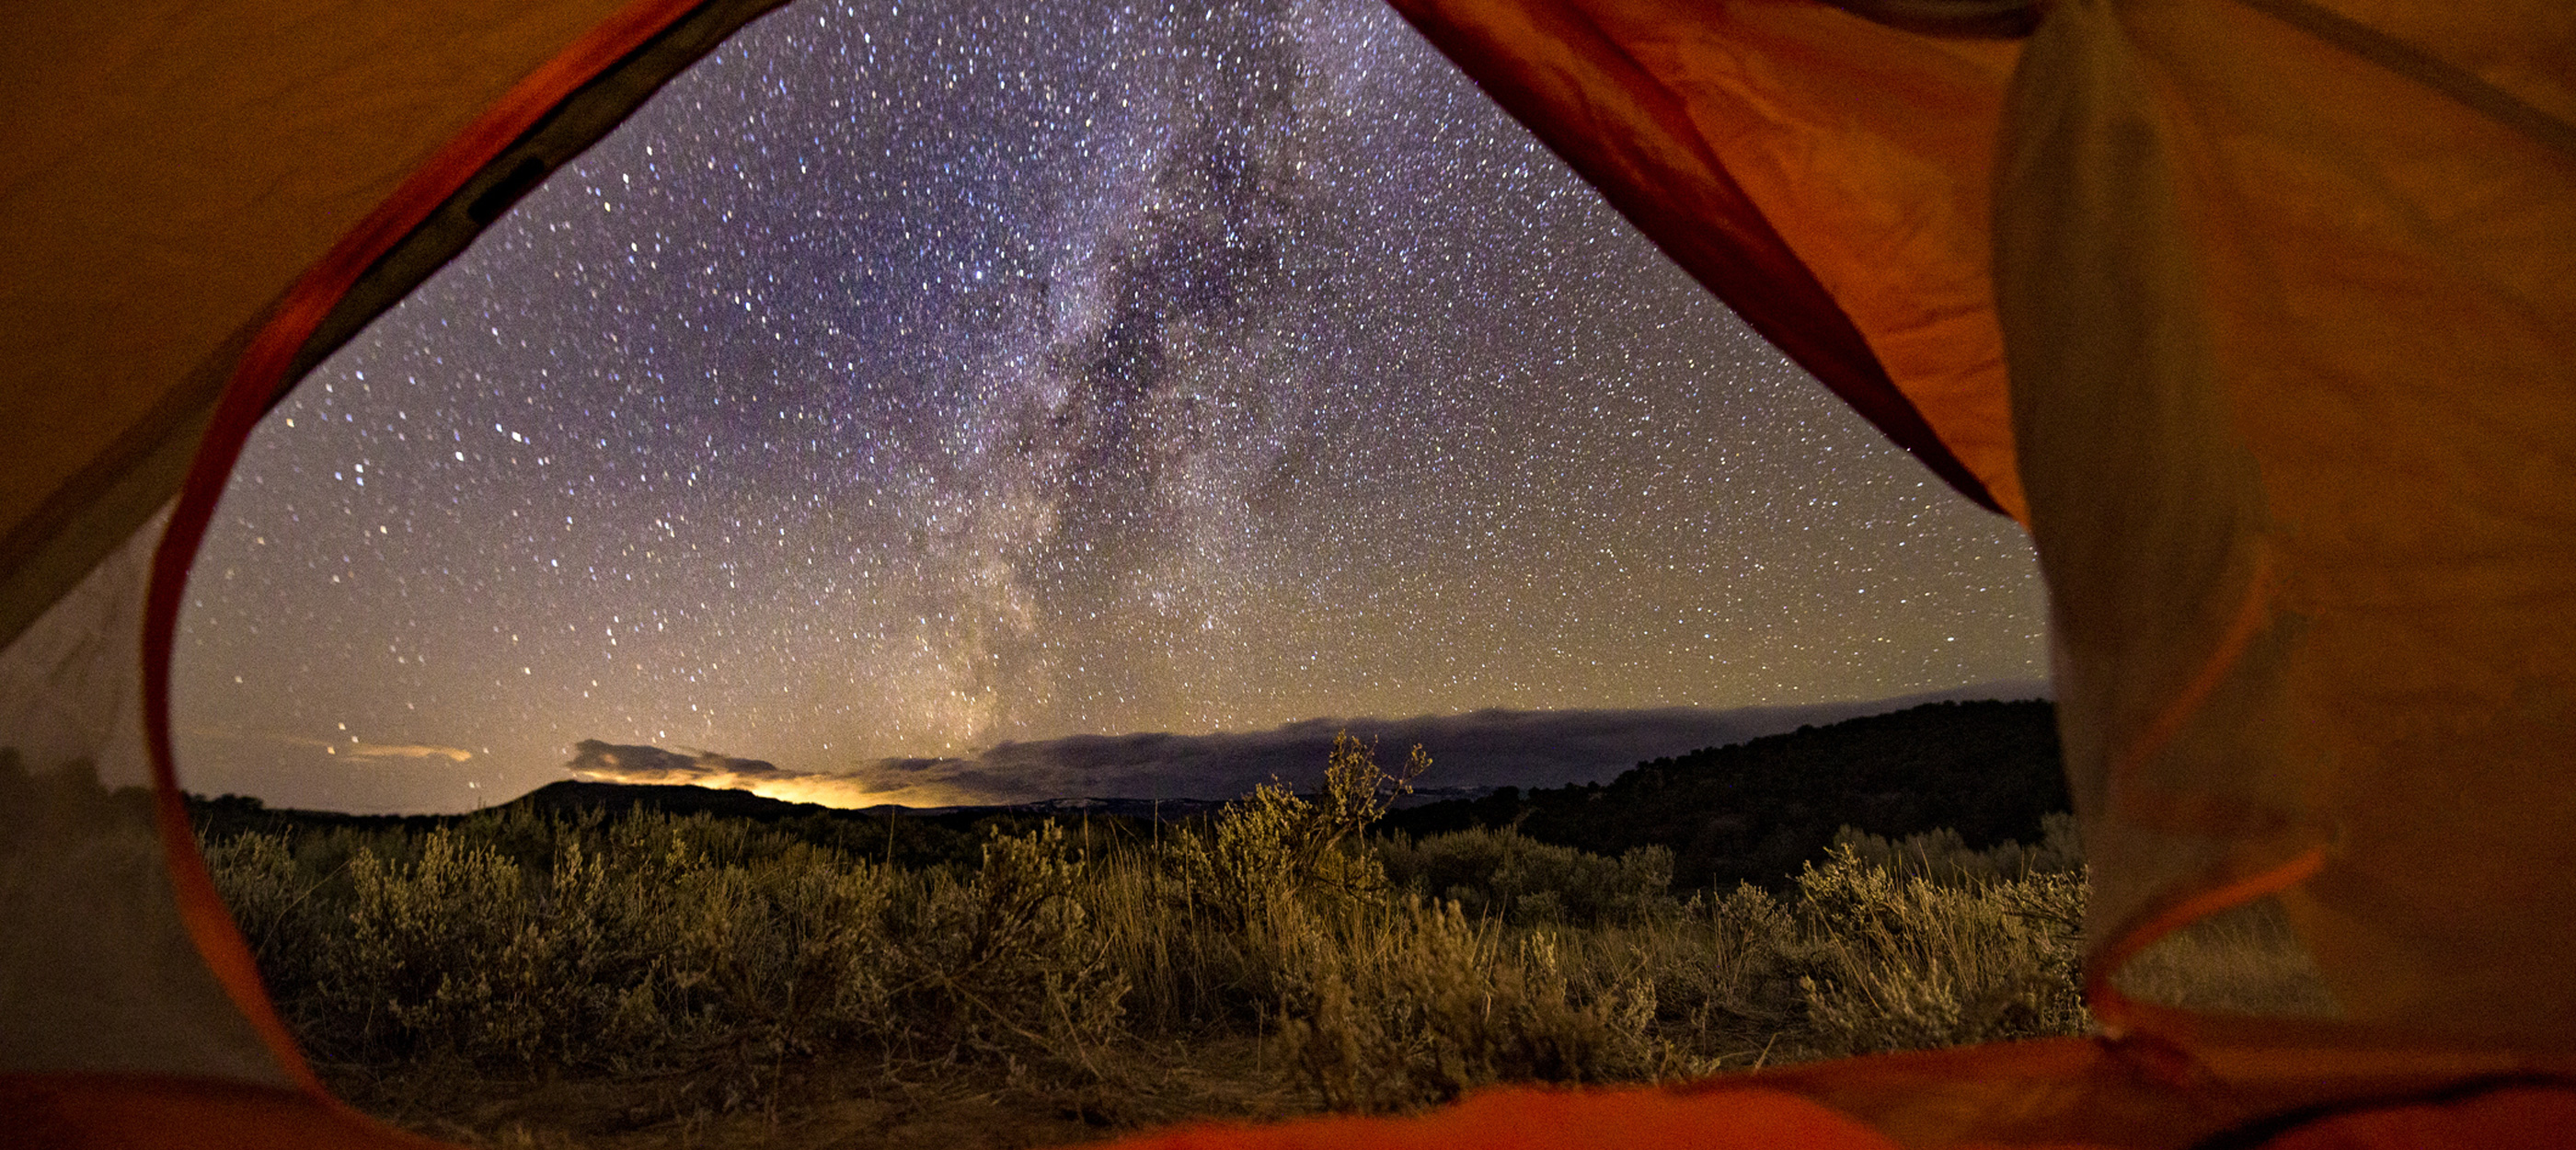 View of the Milky Way from inside of a camping tent.